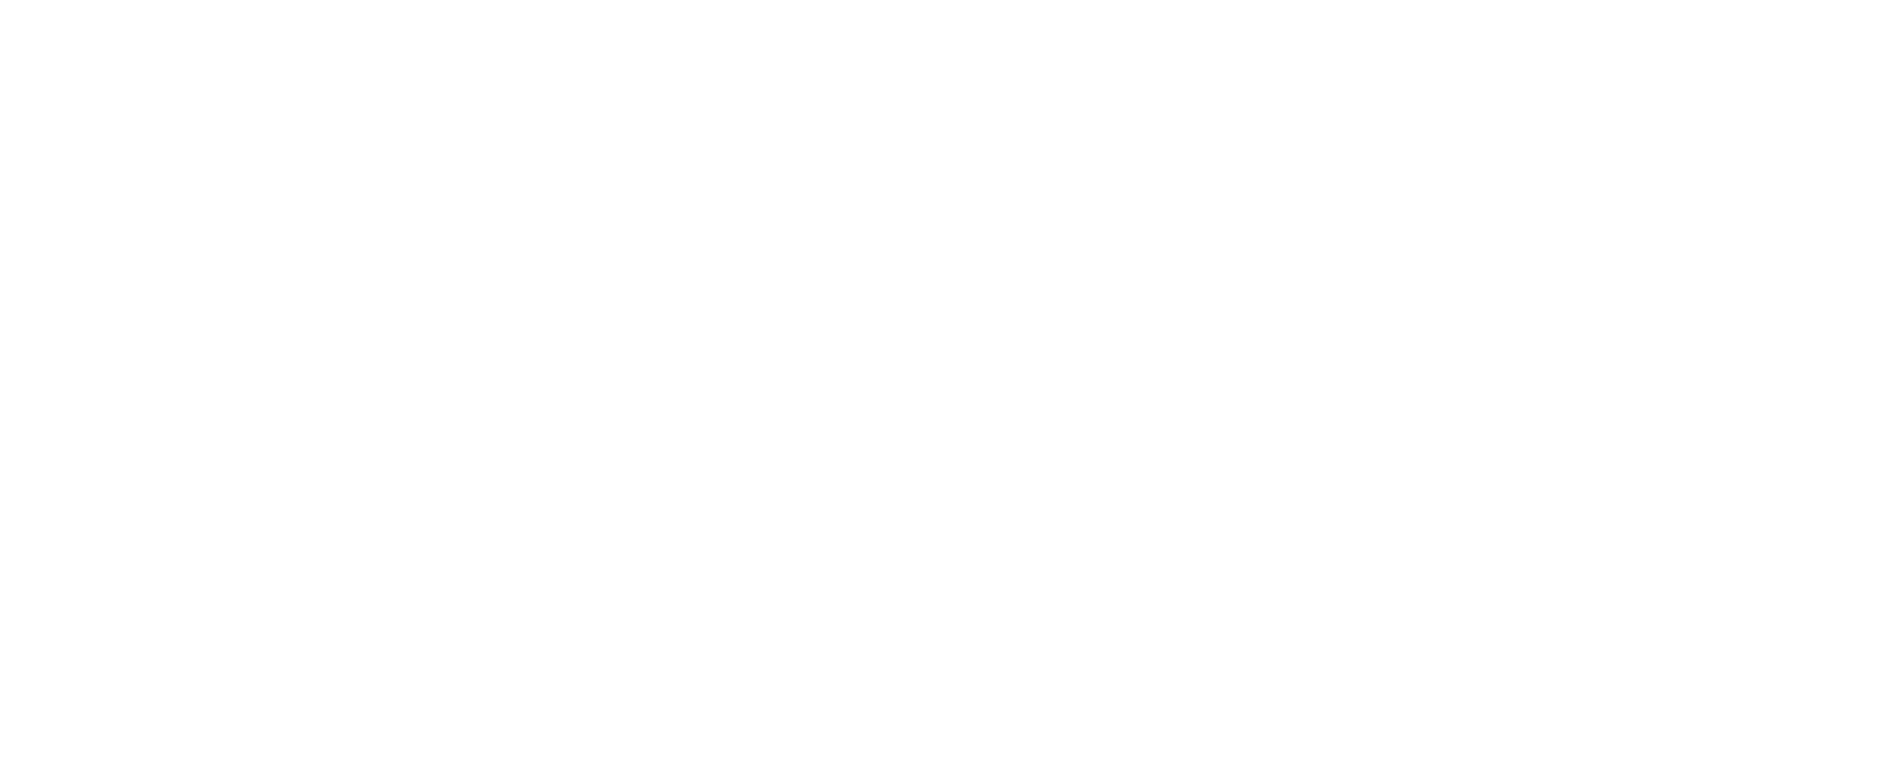 THE INFINITE Houston - An Immersive VR Experience in Space